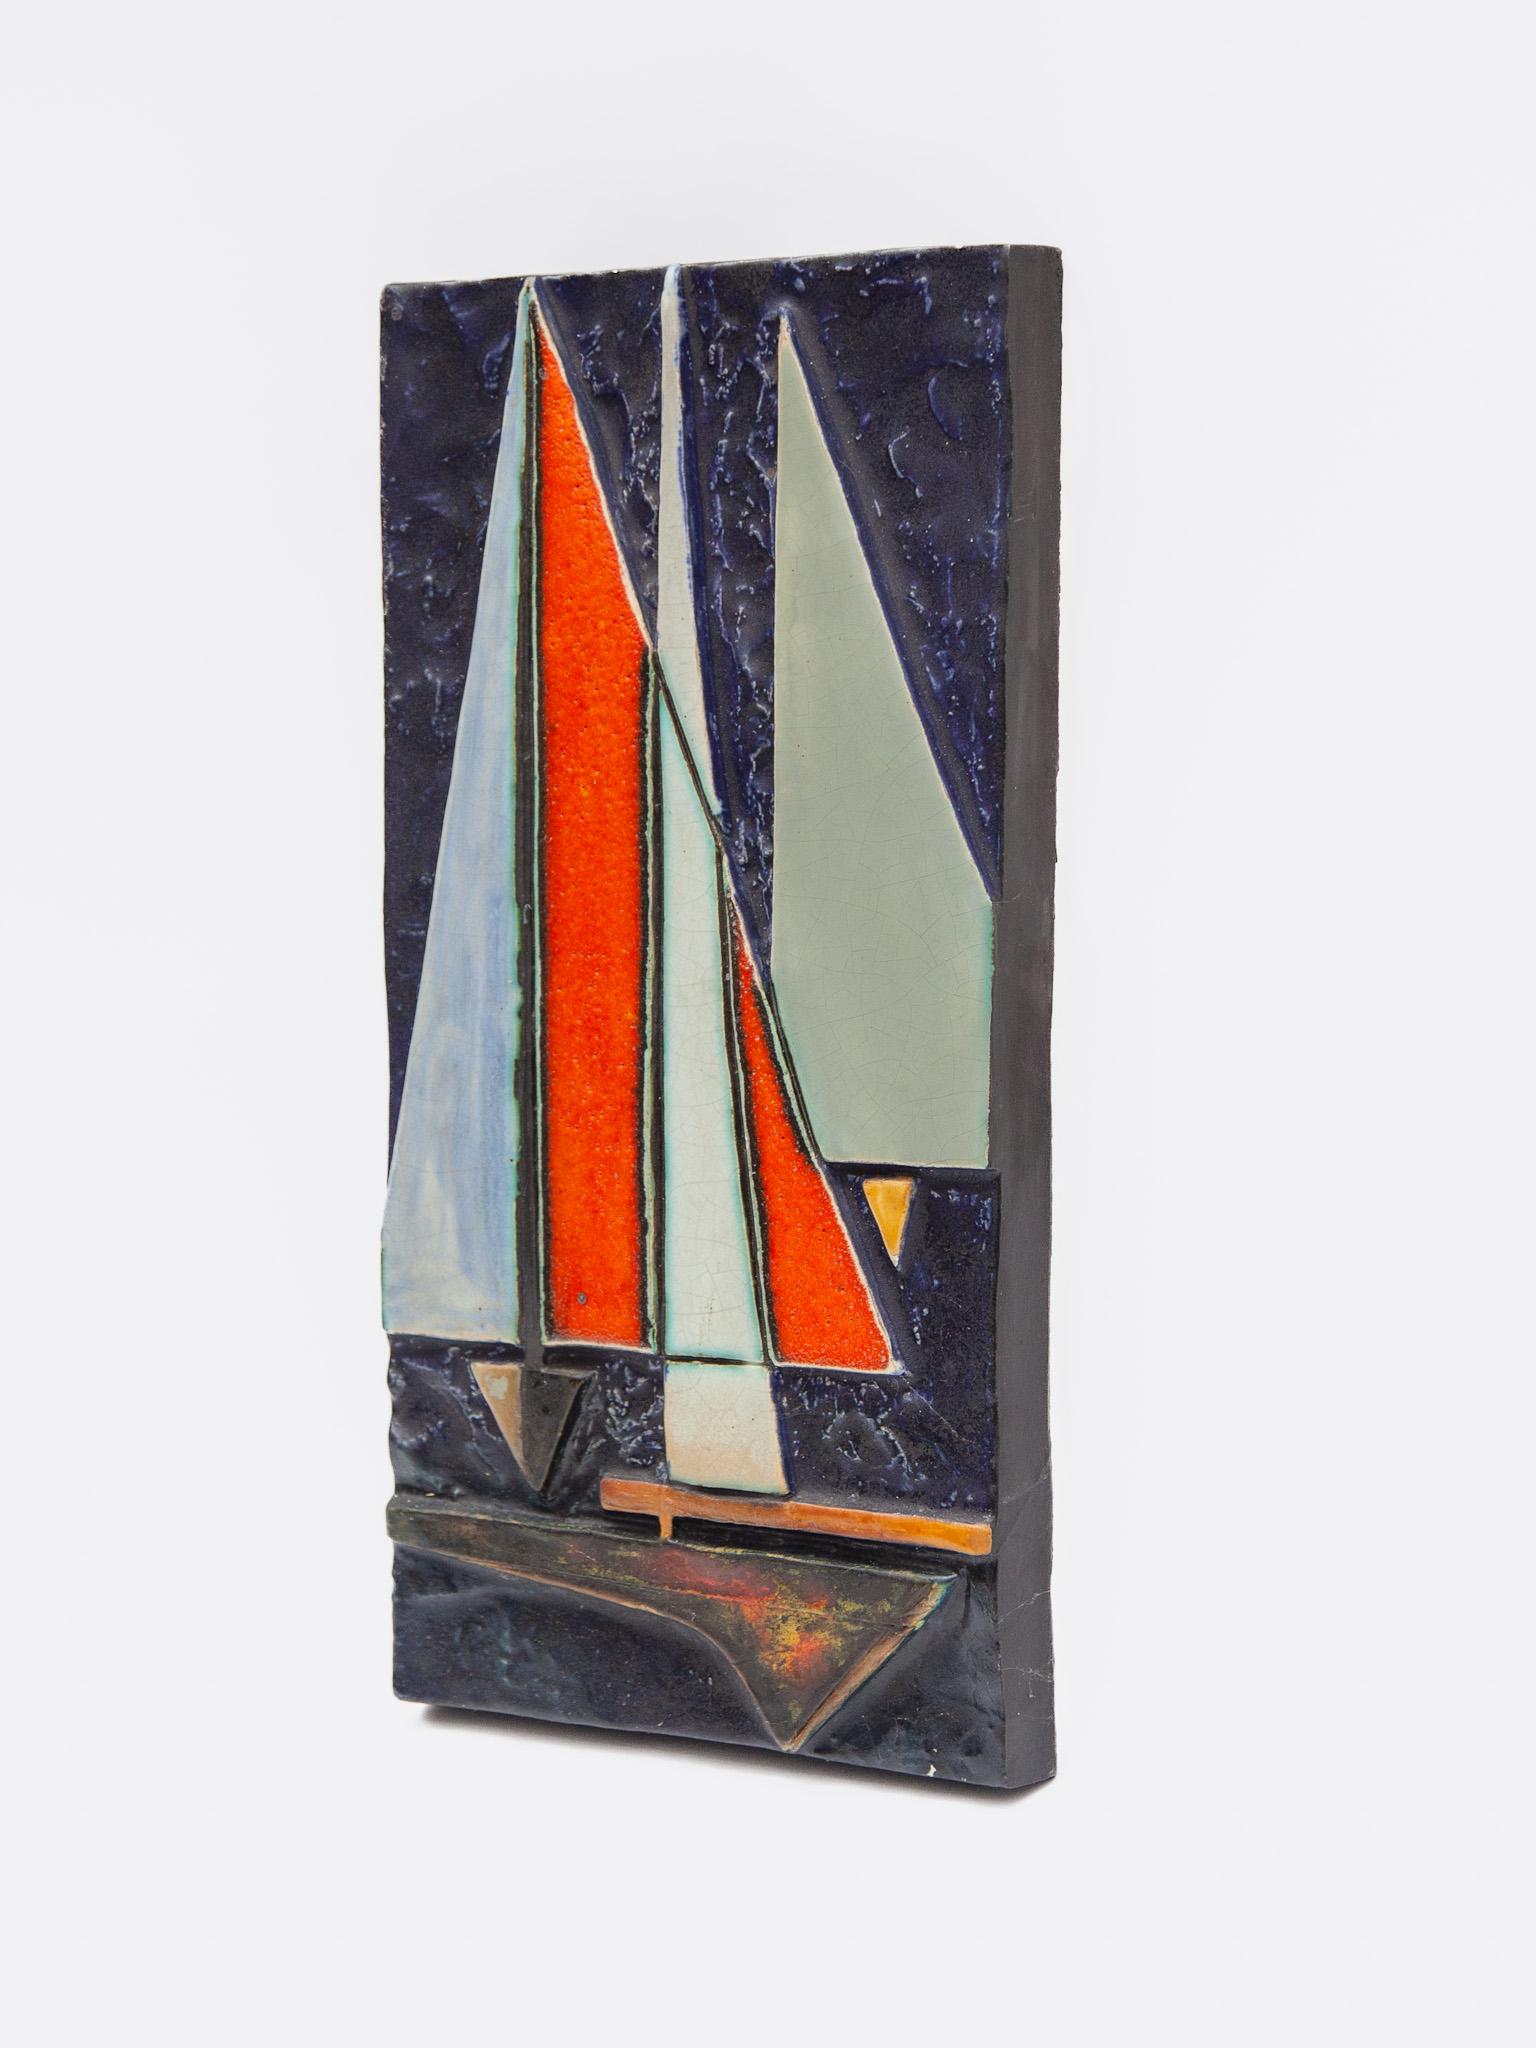 Hand-Crafted German Abstract Sailing Boat Wall Mounted Tile by Helmut Schäffenacker, 1960s For Sale